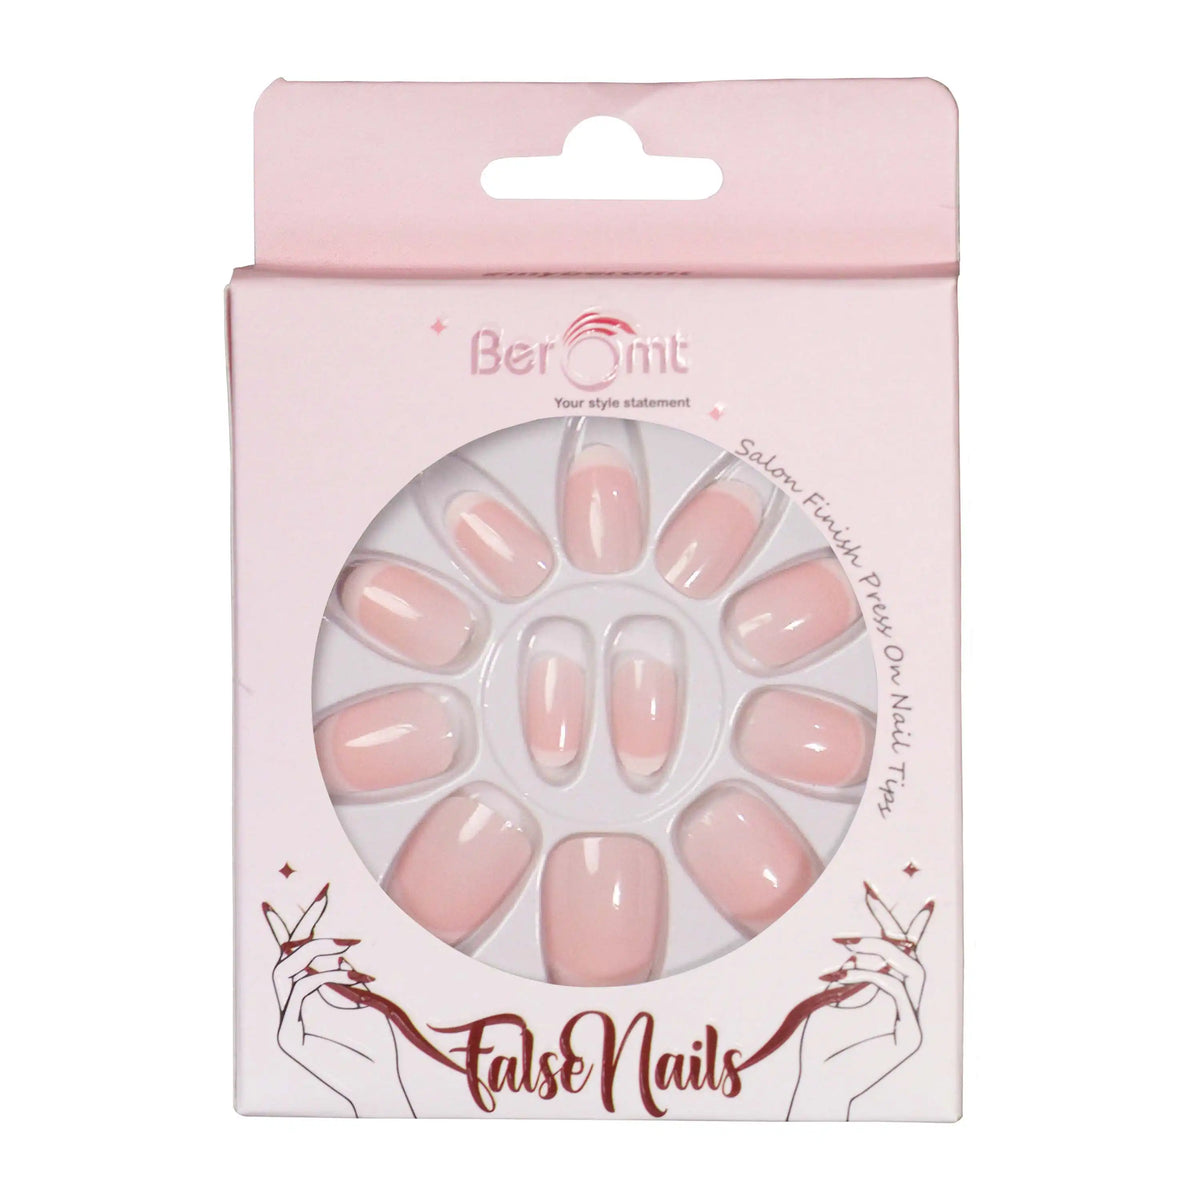 FRENCH TIPS- 130 (NAIL KIT INCLUDED)